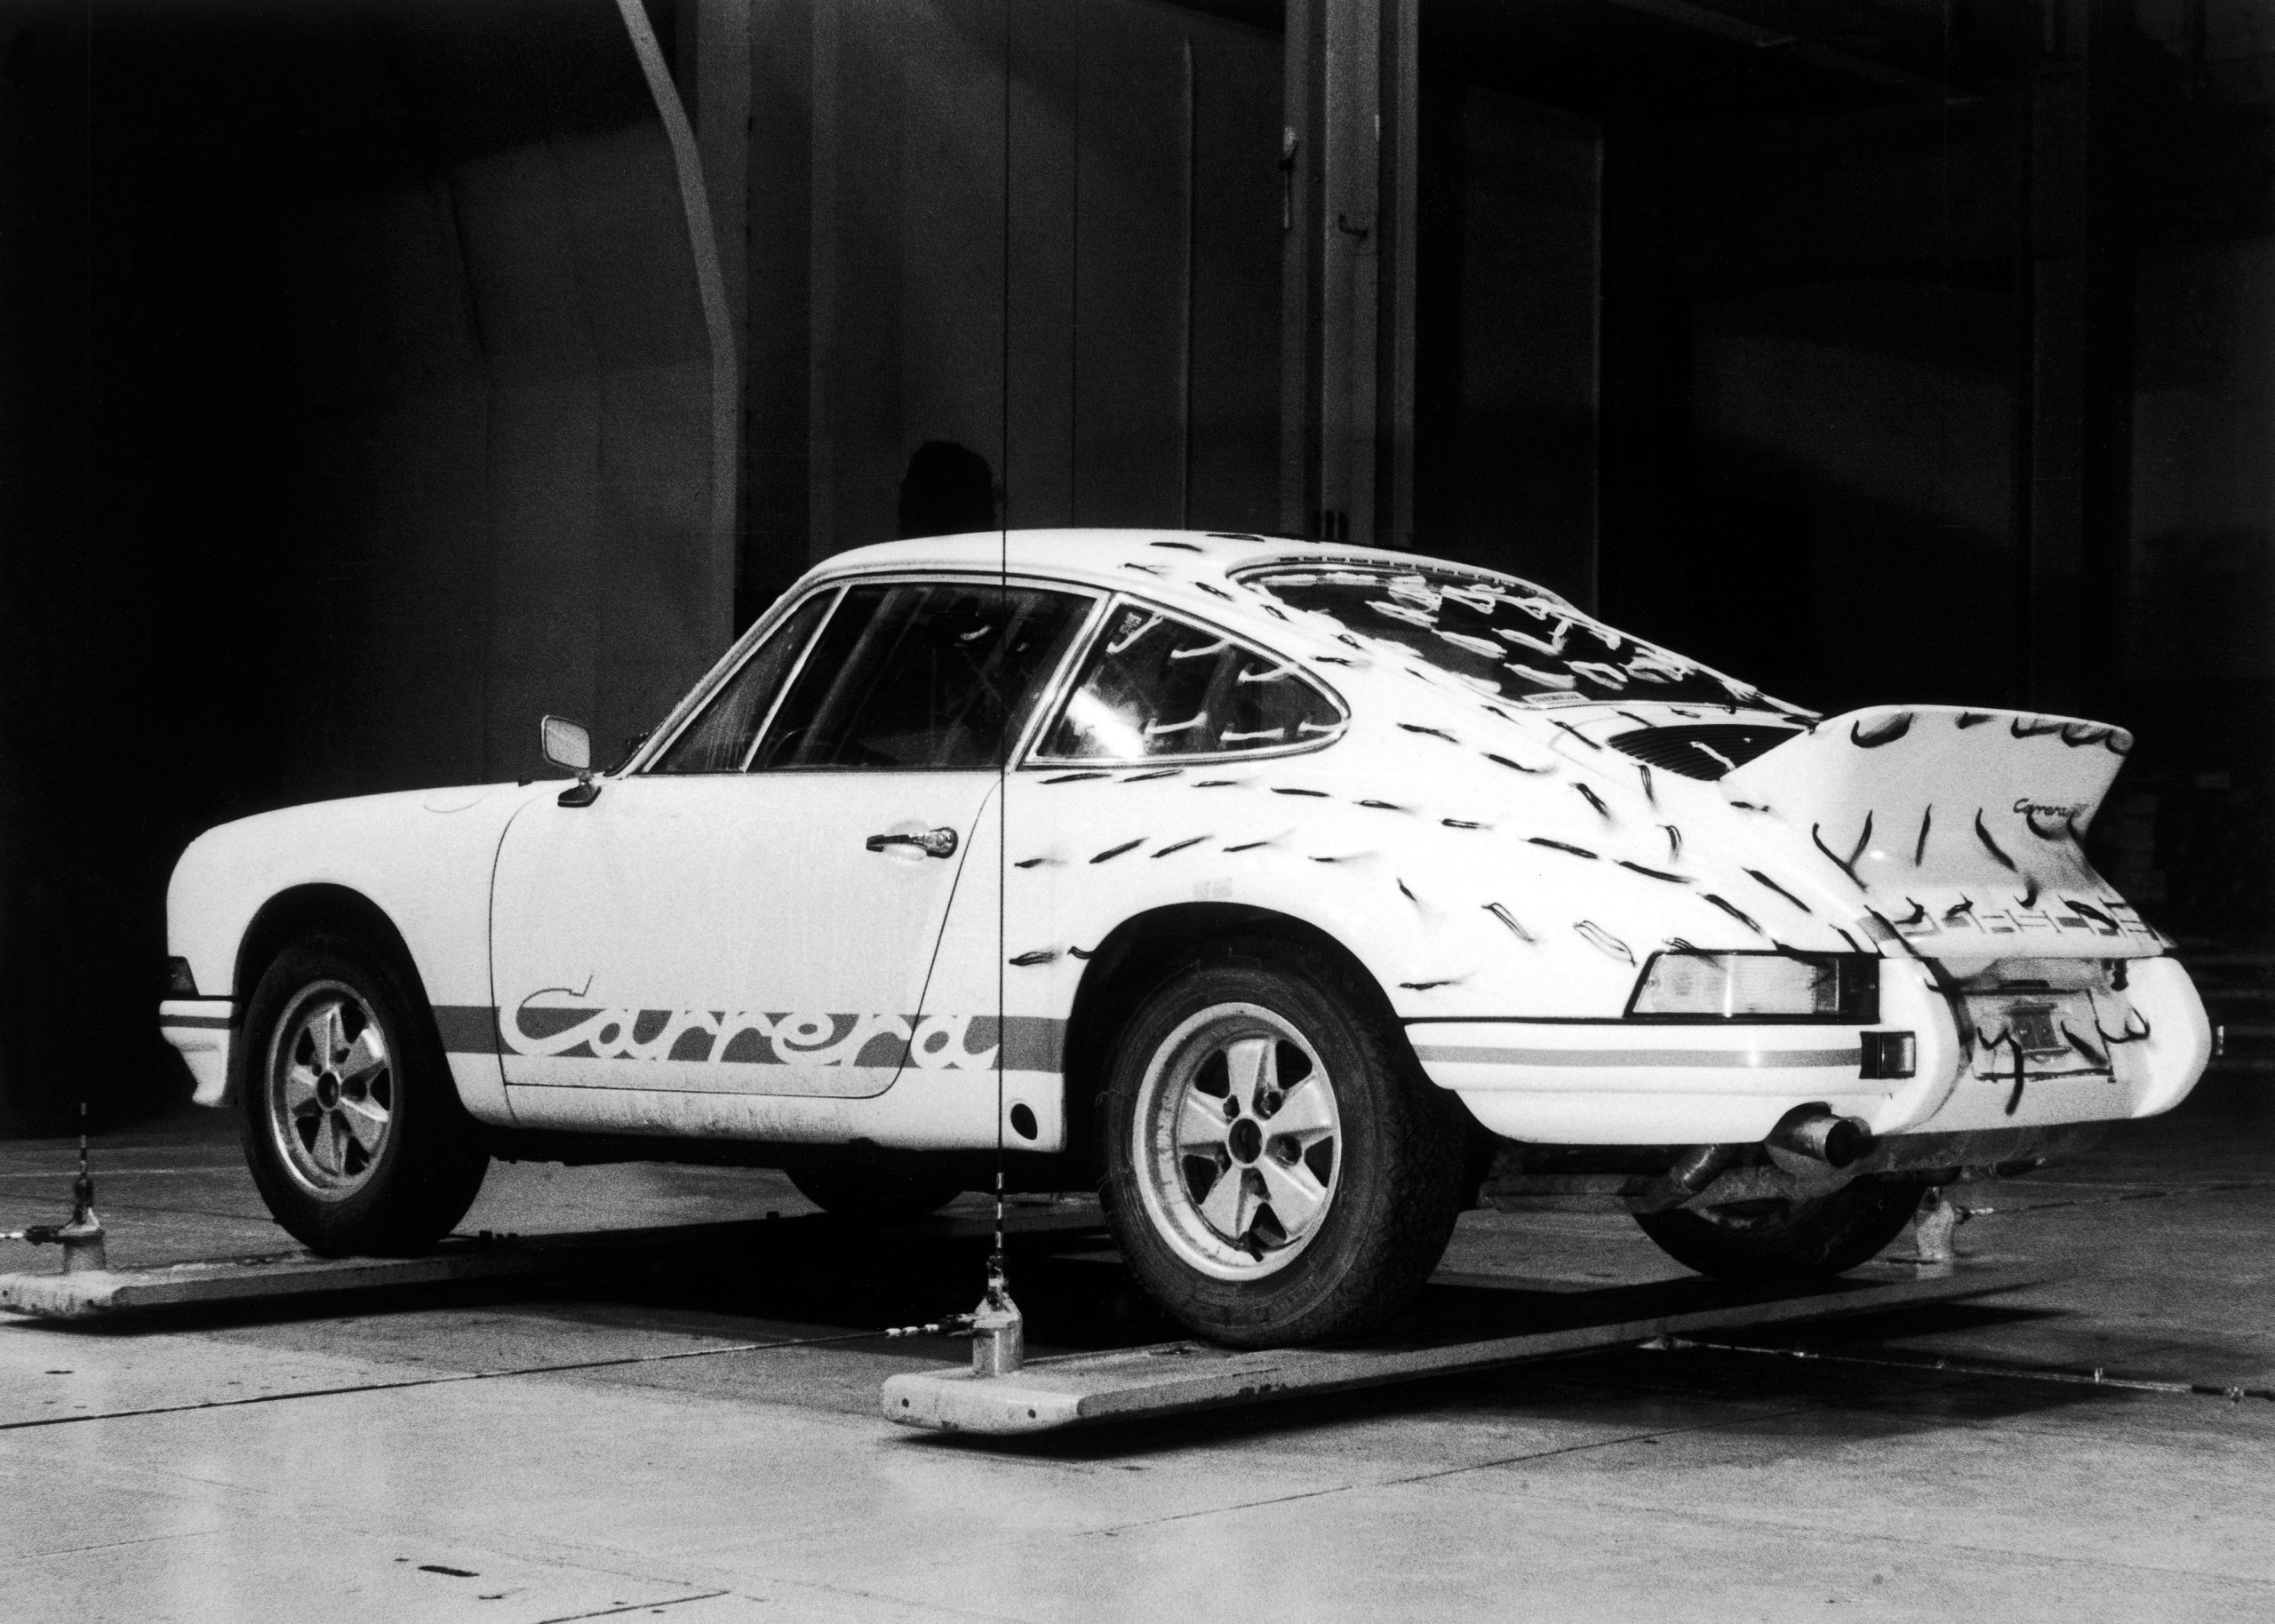 The tale of the Porsche ducktail